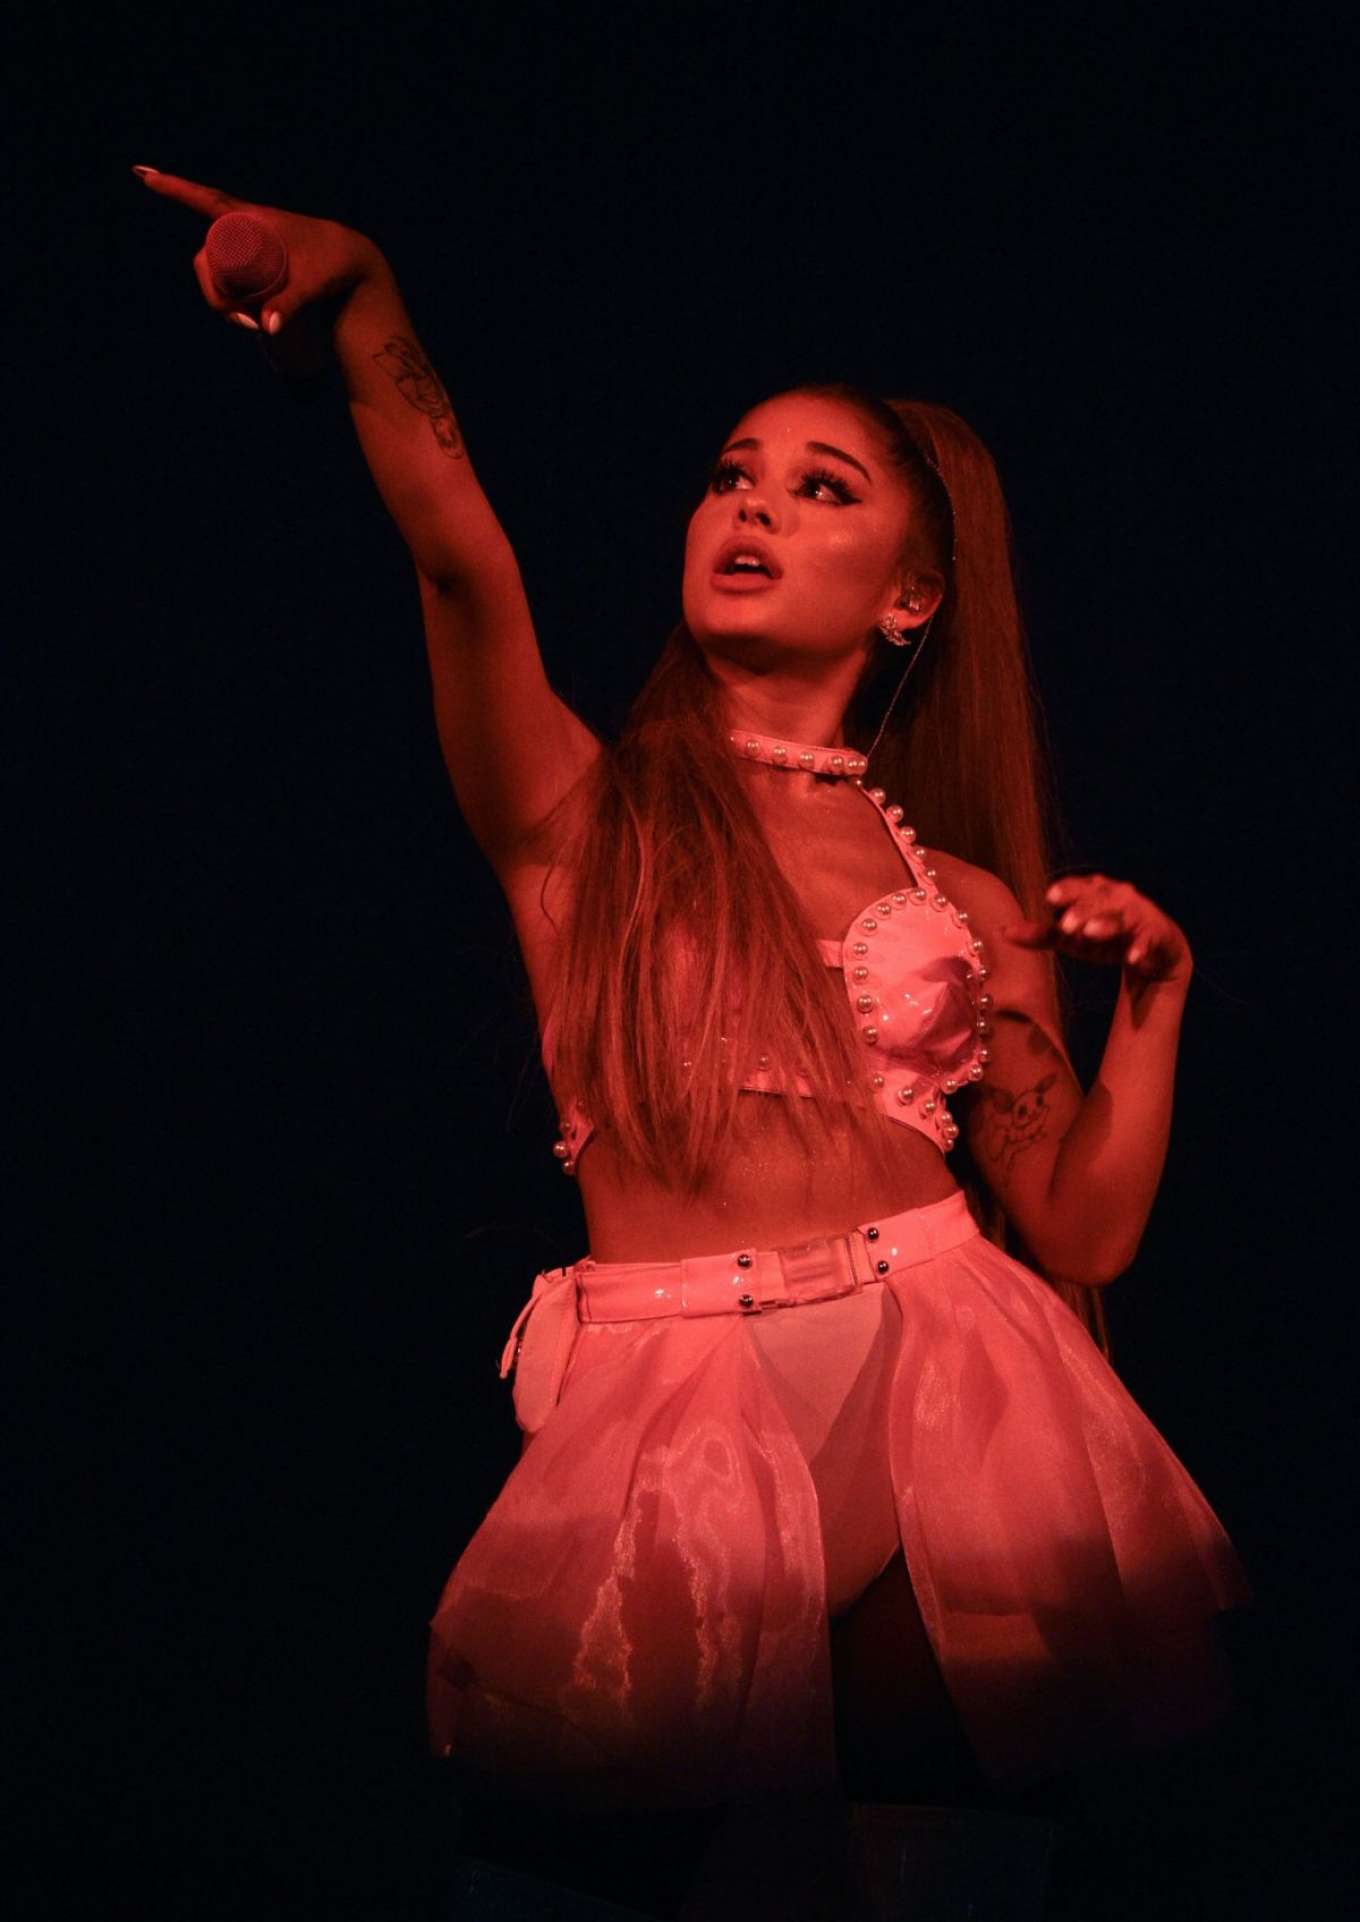 Ariana Grande â€“ Performing at her Sweetener World Tour at O2 Arena in London